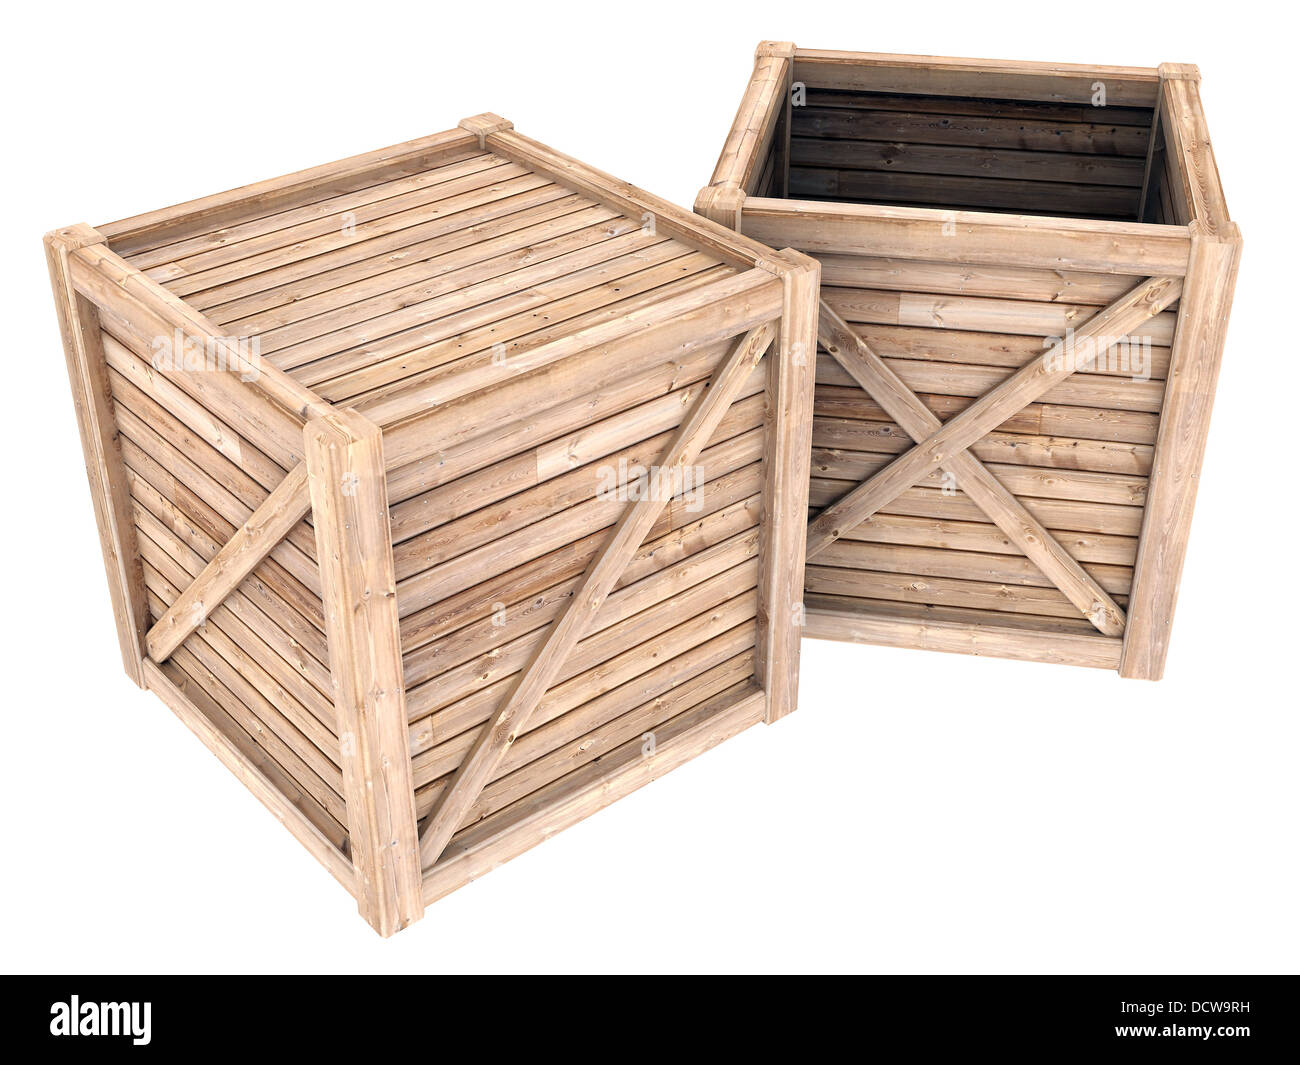 wooden container Stock Photo